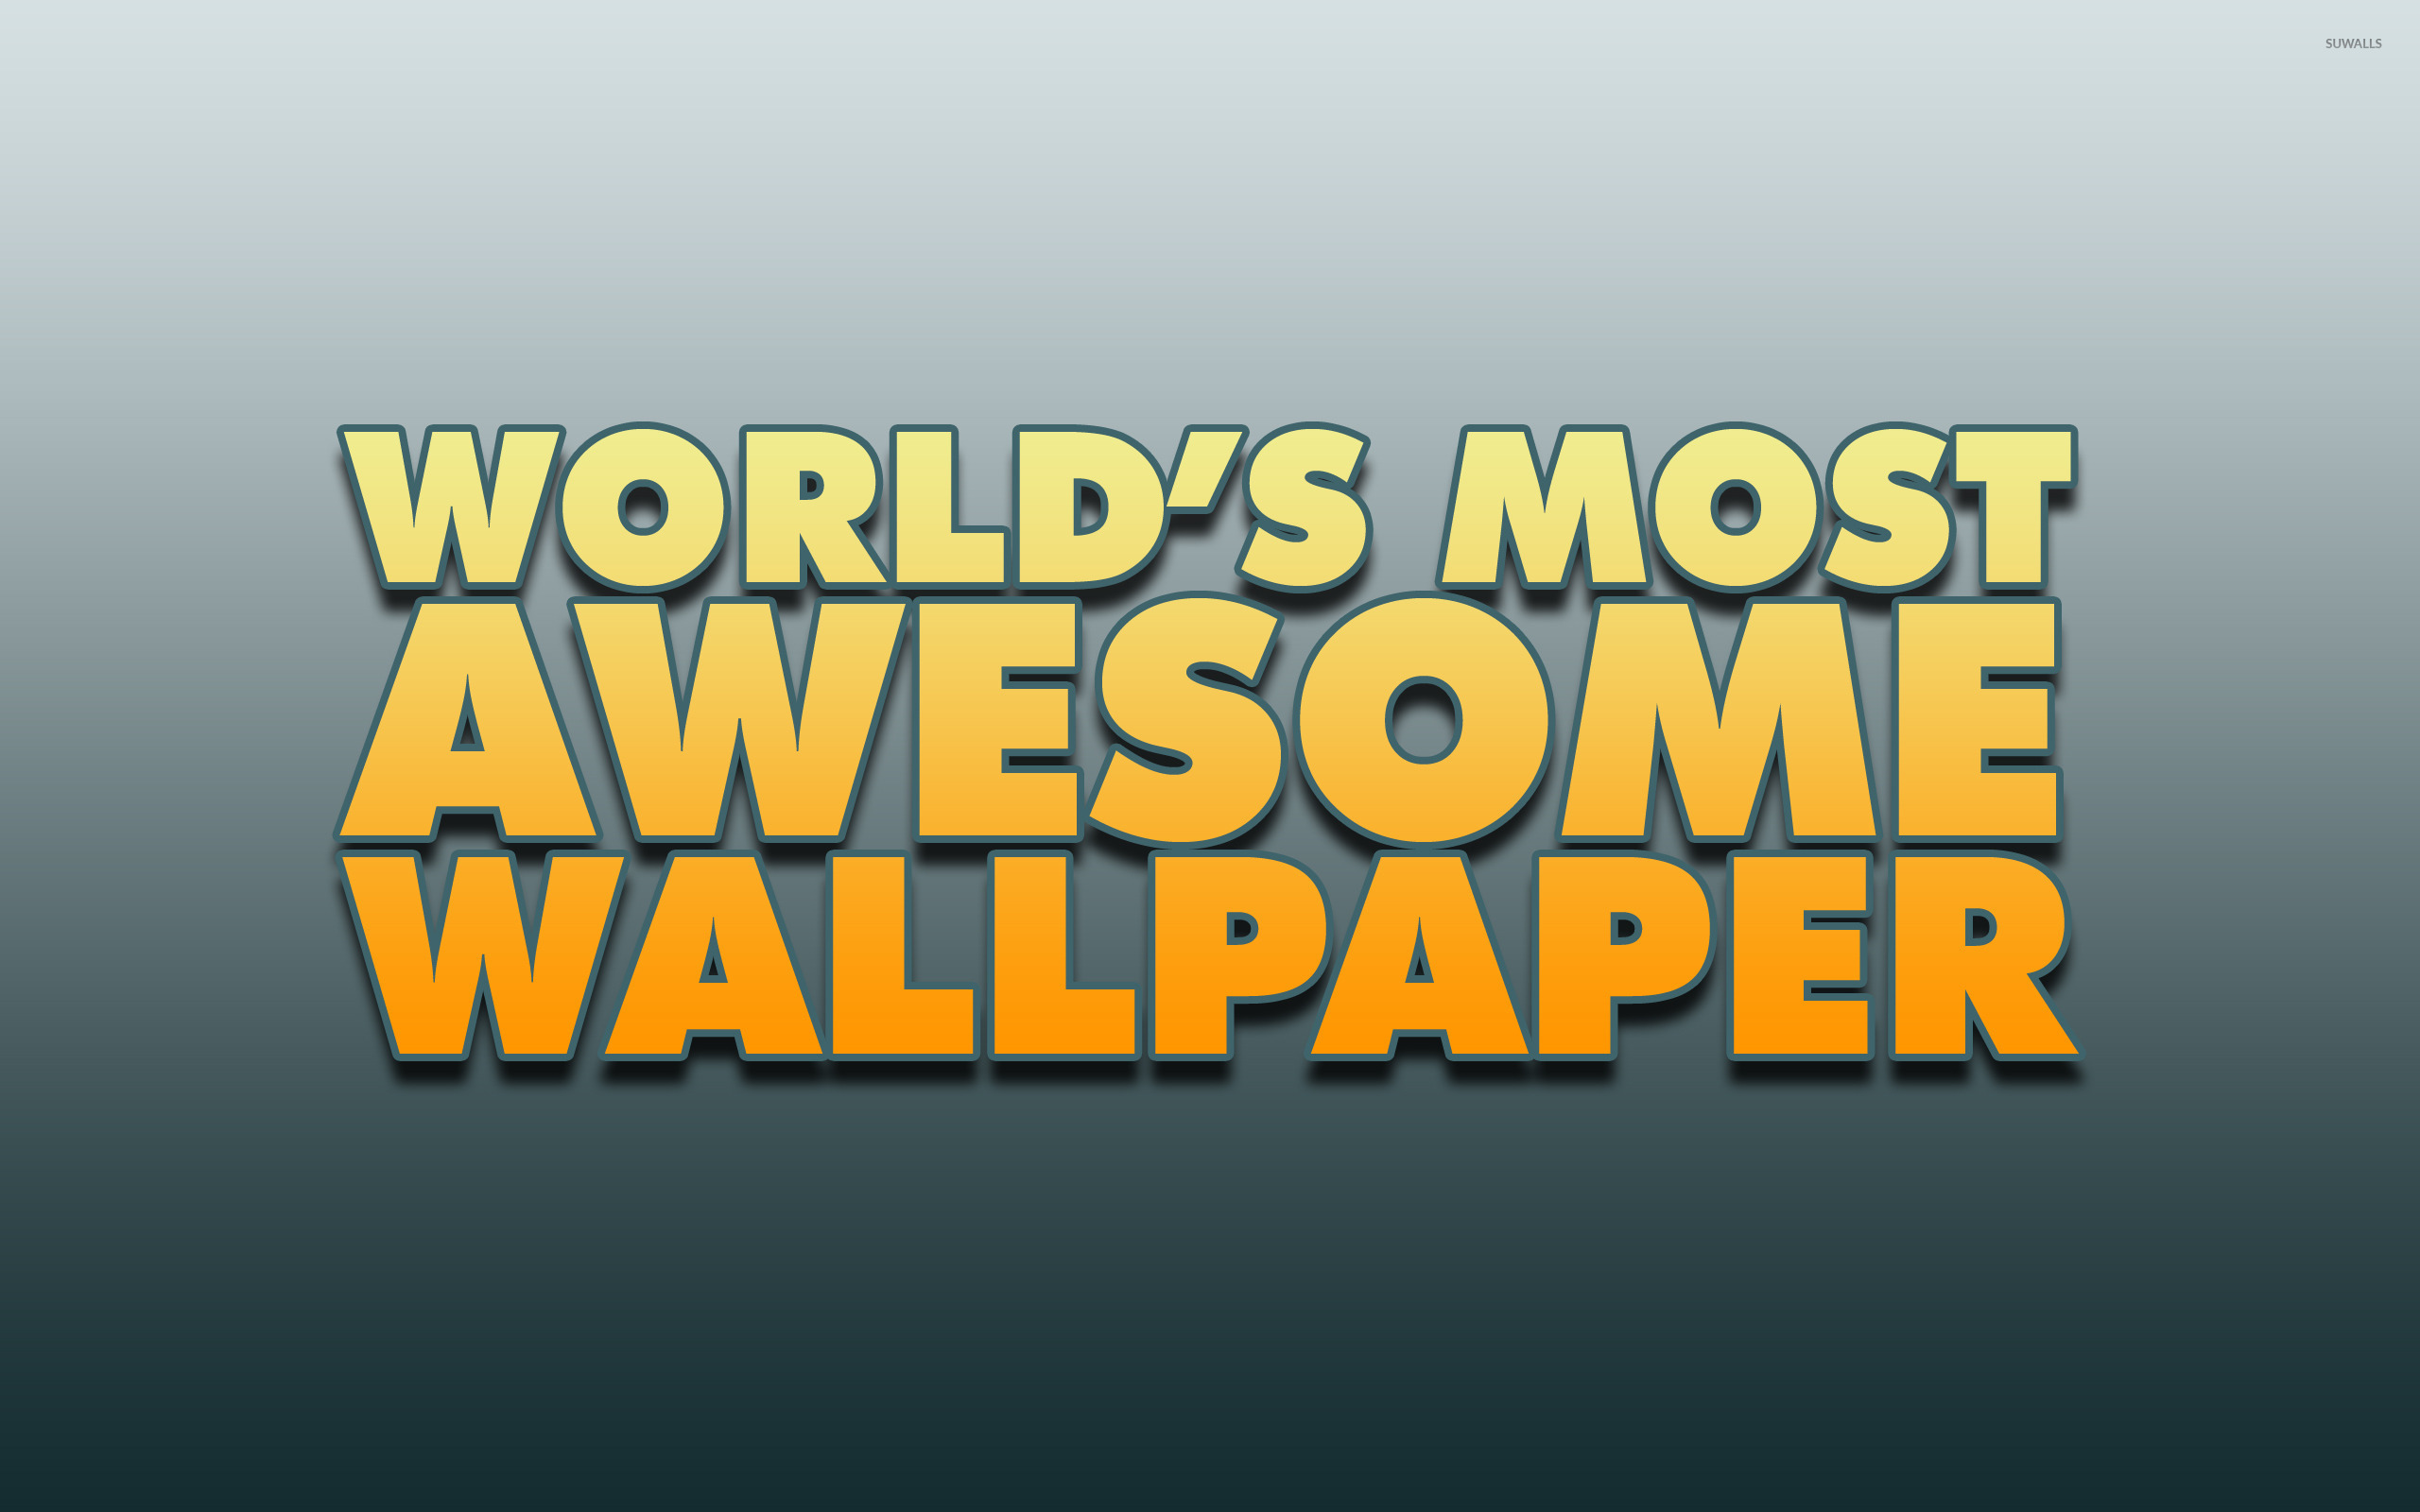 World's most awesome wallpaper wallpaper - Funny wallpapers - #42759